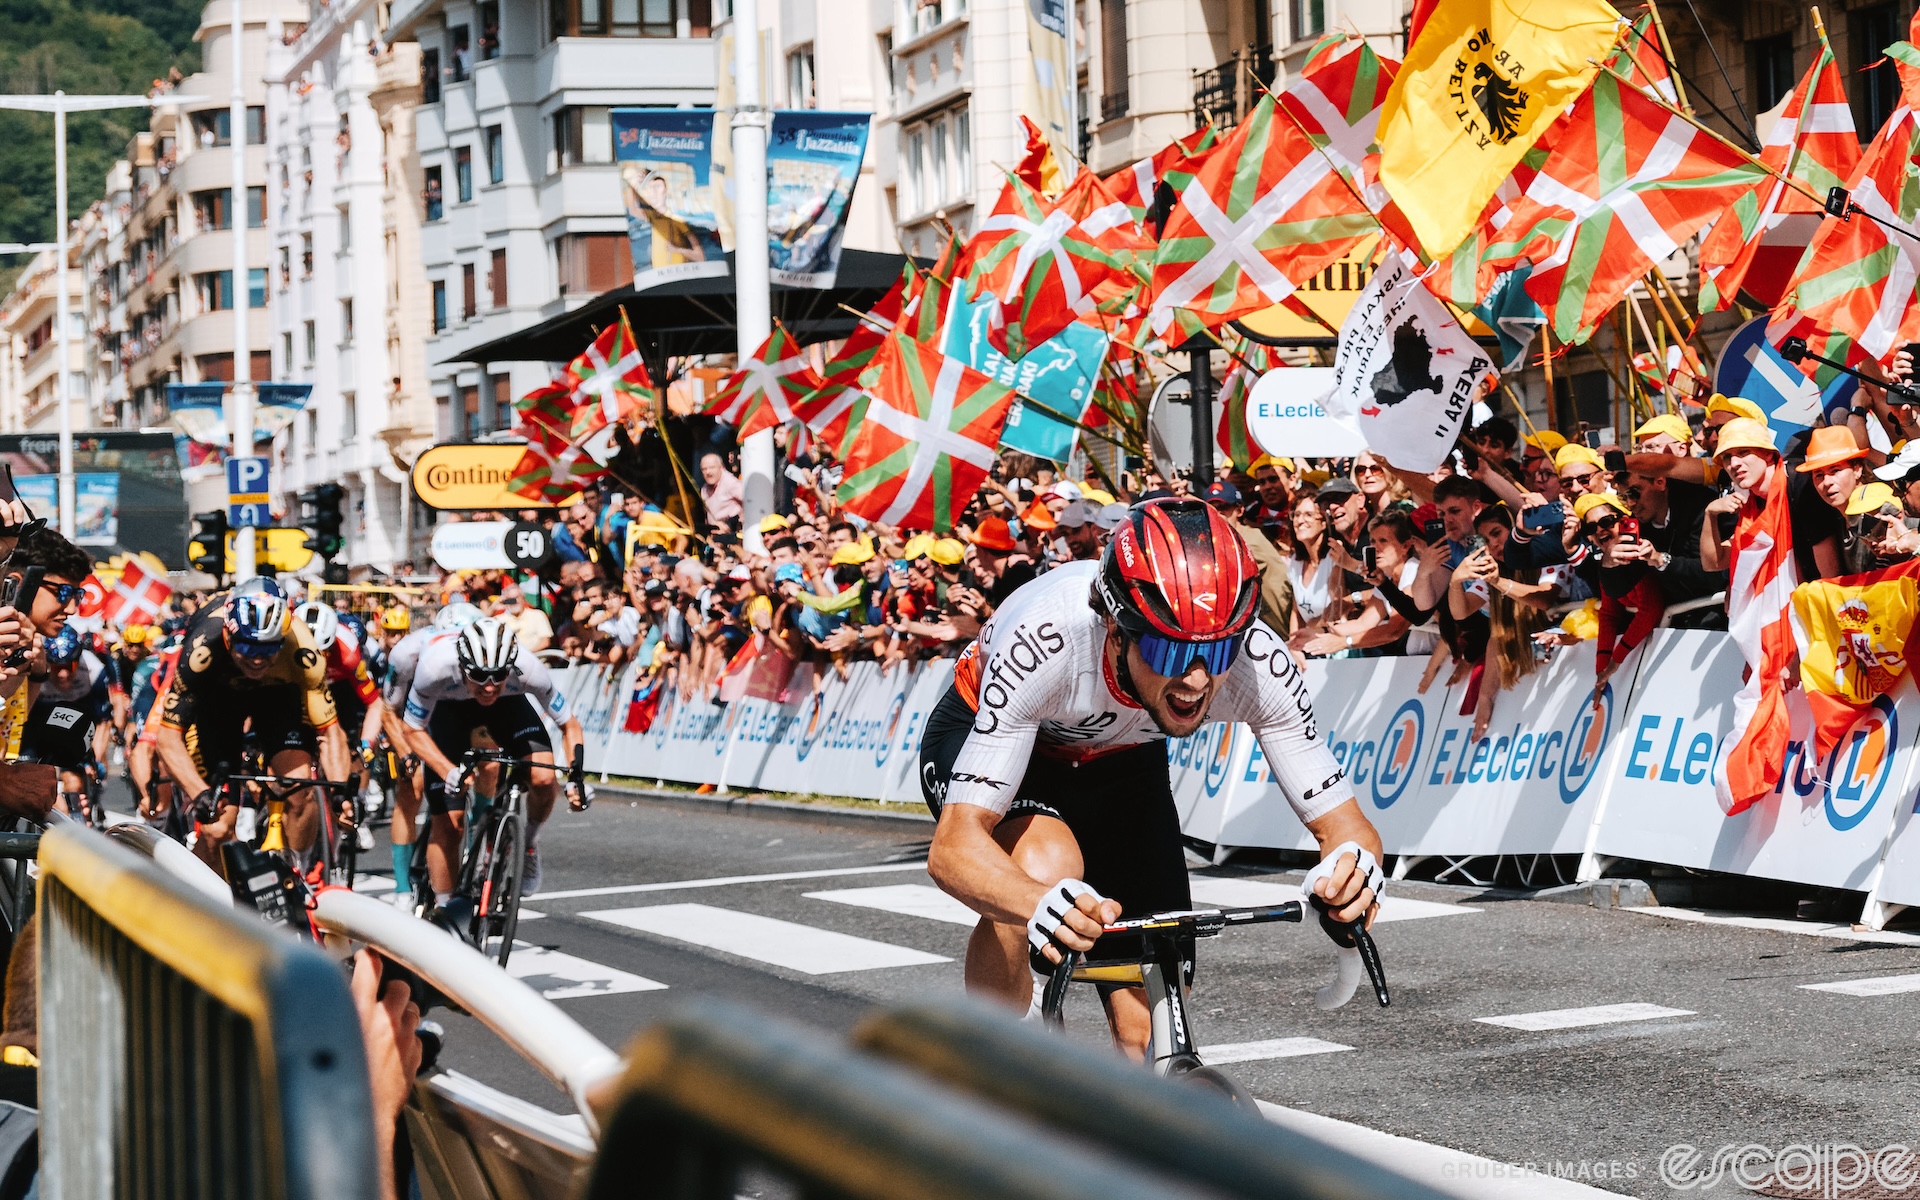 Victor Lafay sprints down the homestretch to win stage 2 of the 2023 Tour de France. His mouth is open and behind, Wout van Aert leads a furious chase. Masses of fans, many waving orange, green and white Basque flags, lean over the barriers to cheer.